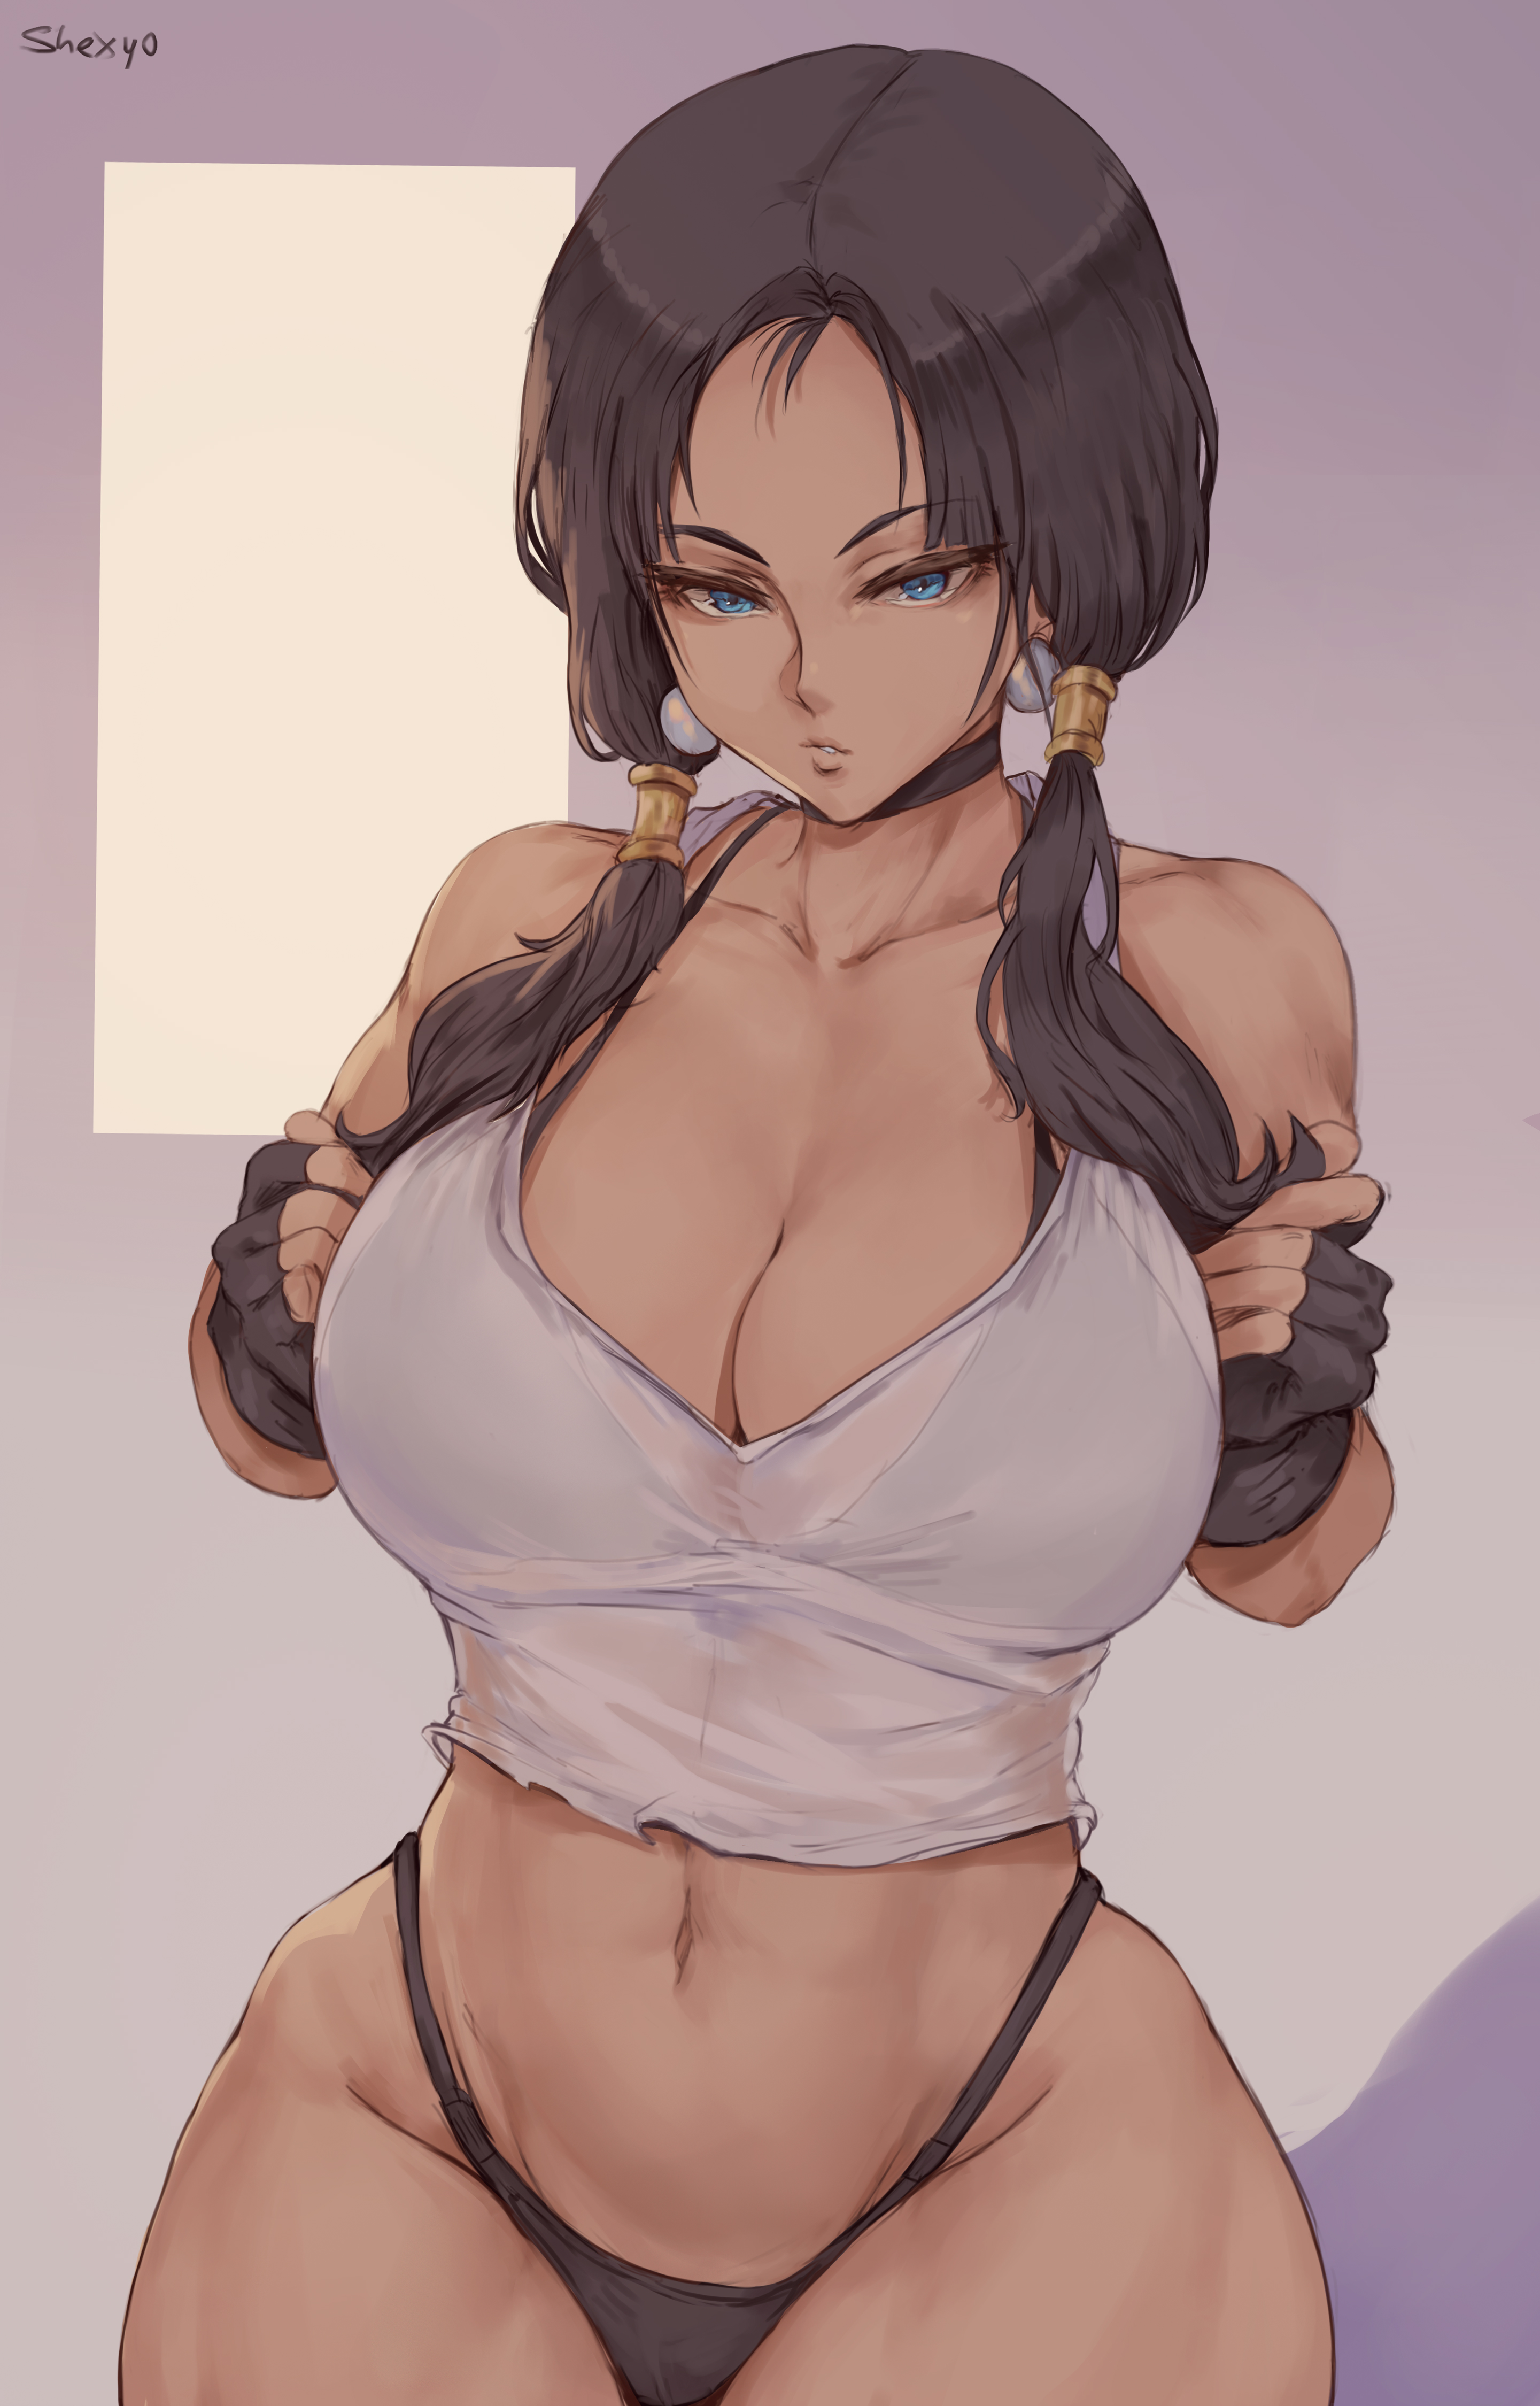 Anime 2881x4500 Videl Dragon Ball Z anime anime girls black hair twintails looking at viewer blue eyes parted lips choker see-through clothing cleavage white tops underwear belly panties black panties wide hips curvy portrait display 2D artwork drawing illustration fan art Shexyo tanned